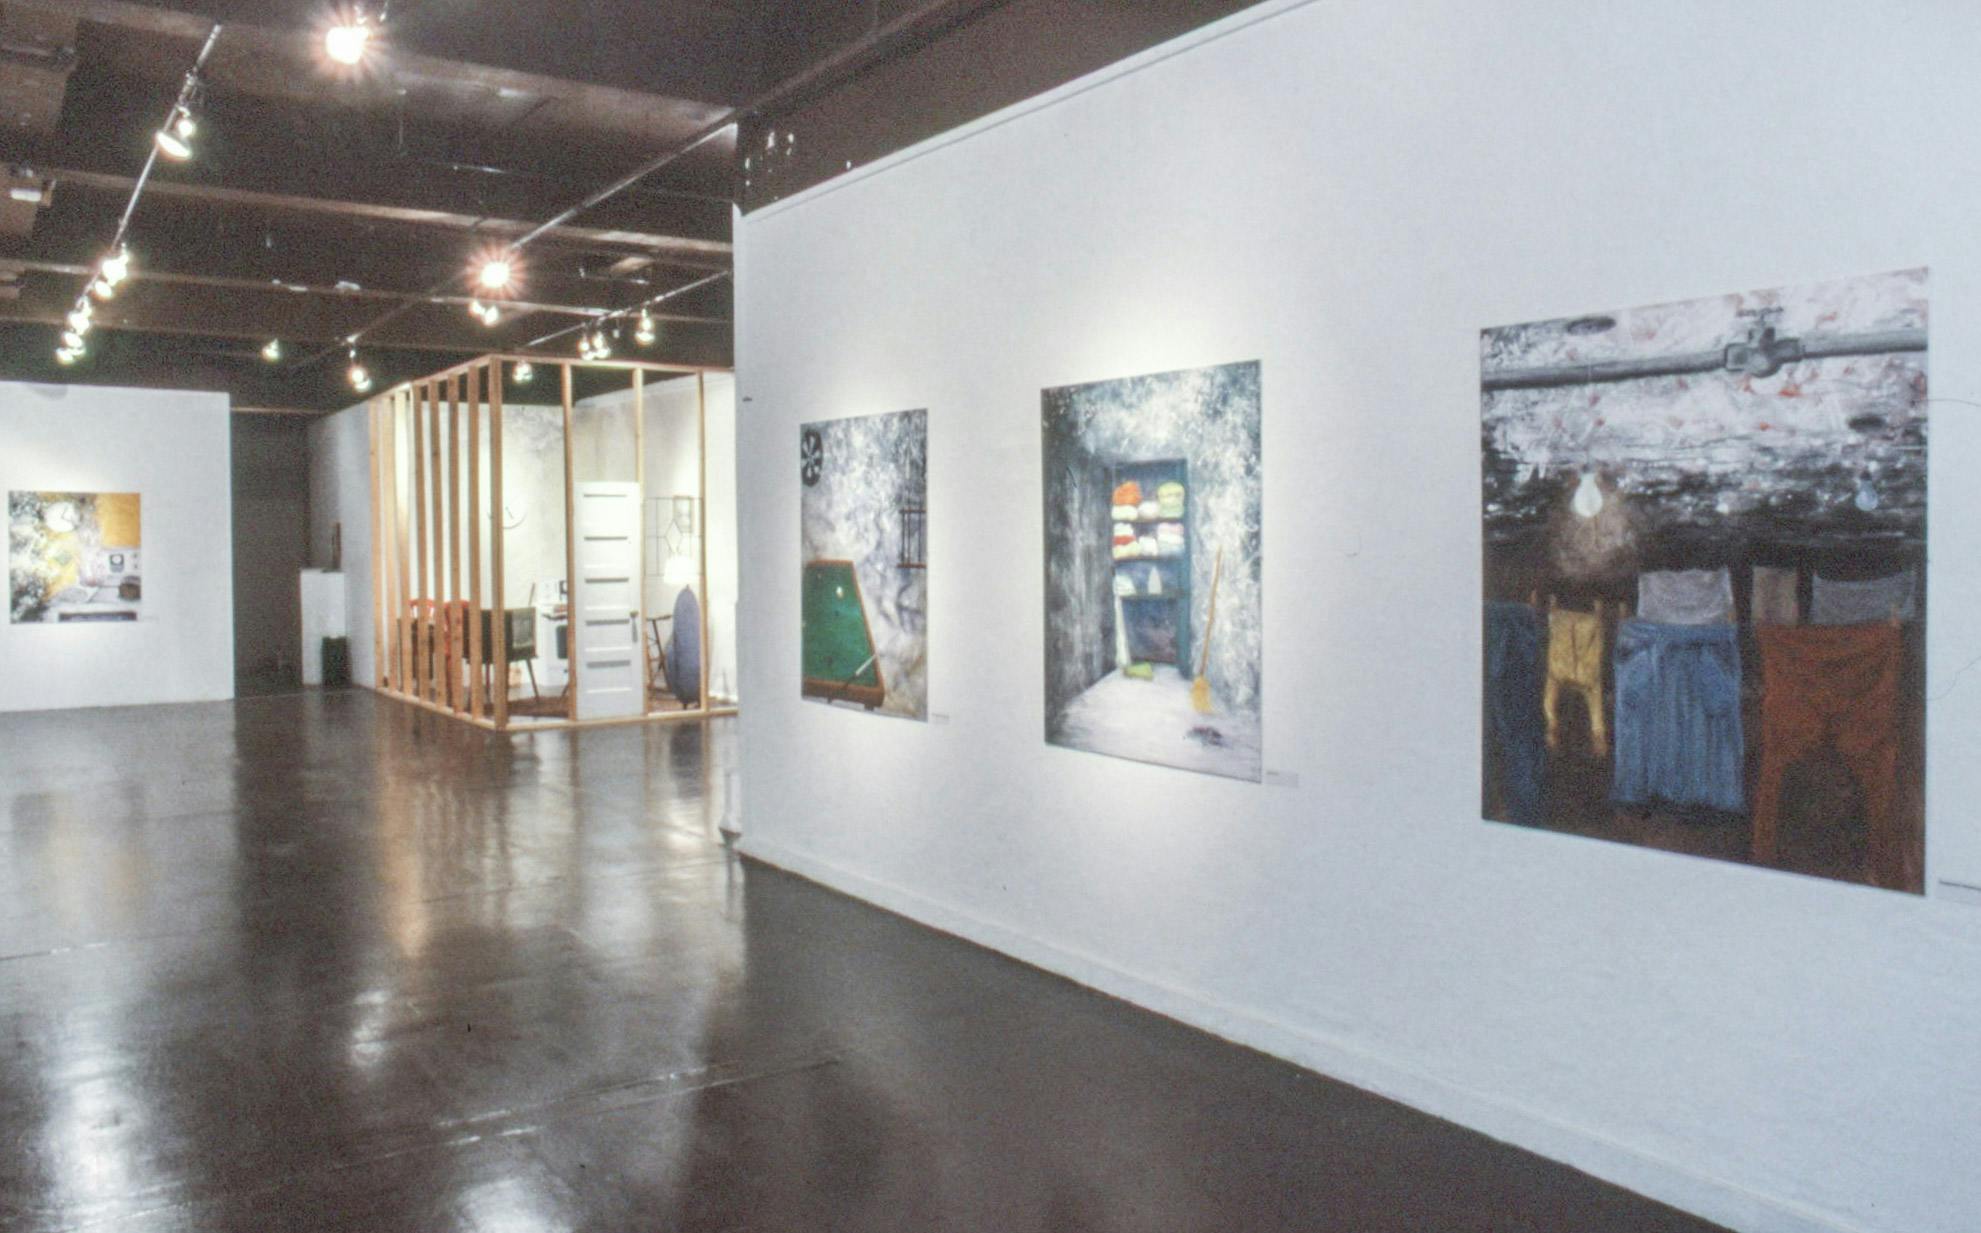 A gallery with paintings on the wall, and a large installation. The paintings show a pool table, a closet, and a clothesline in a basement. The installation is in a wooden frame with a white door.